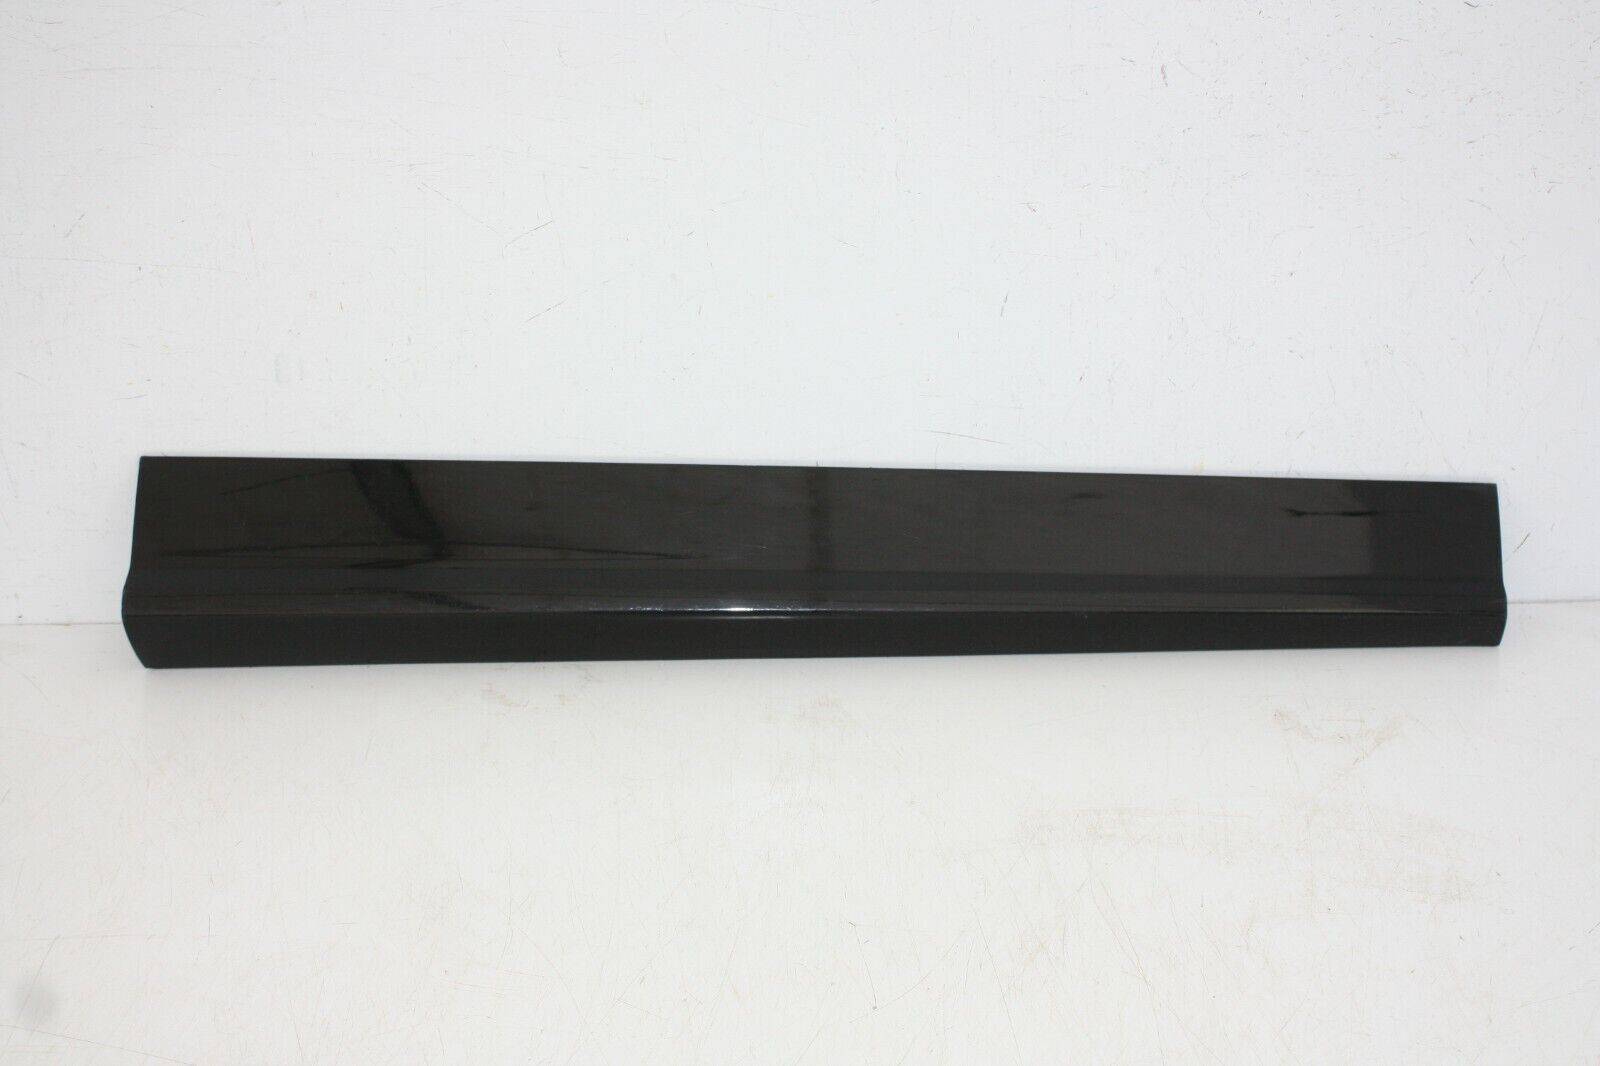 Audi Q5 S Line Front Right Door Moulding 2017 TO 2020 80A853960B Genuine 175367544189